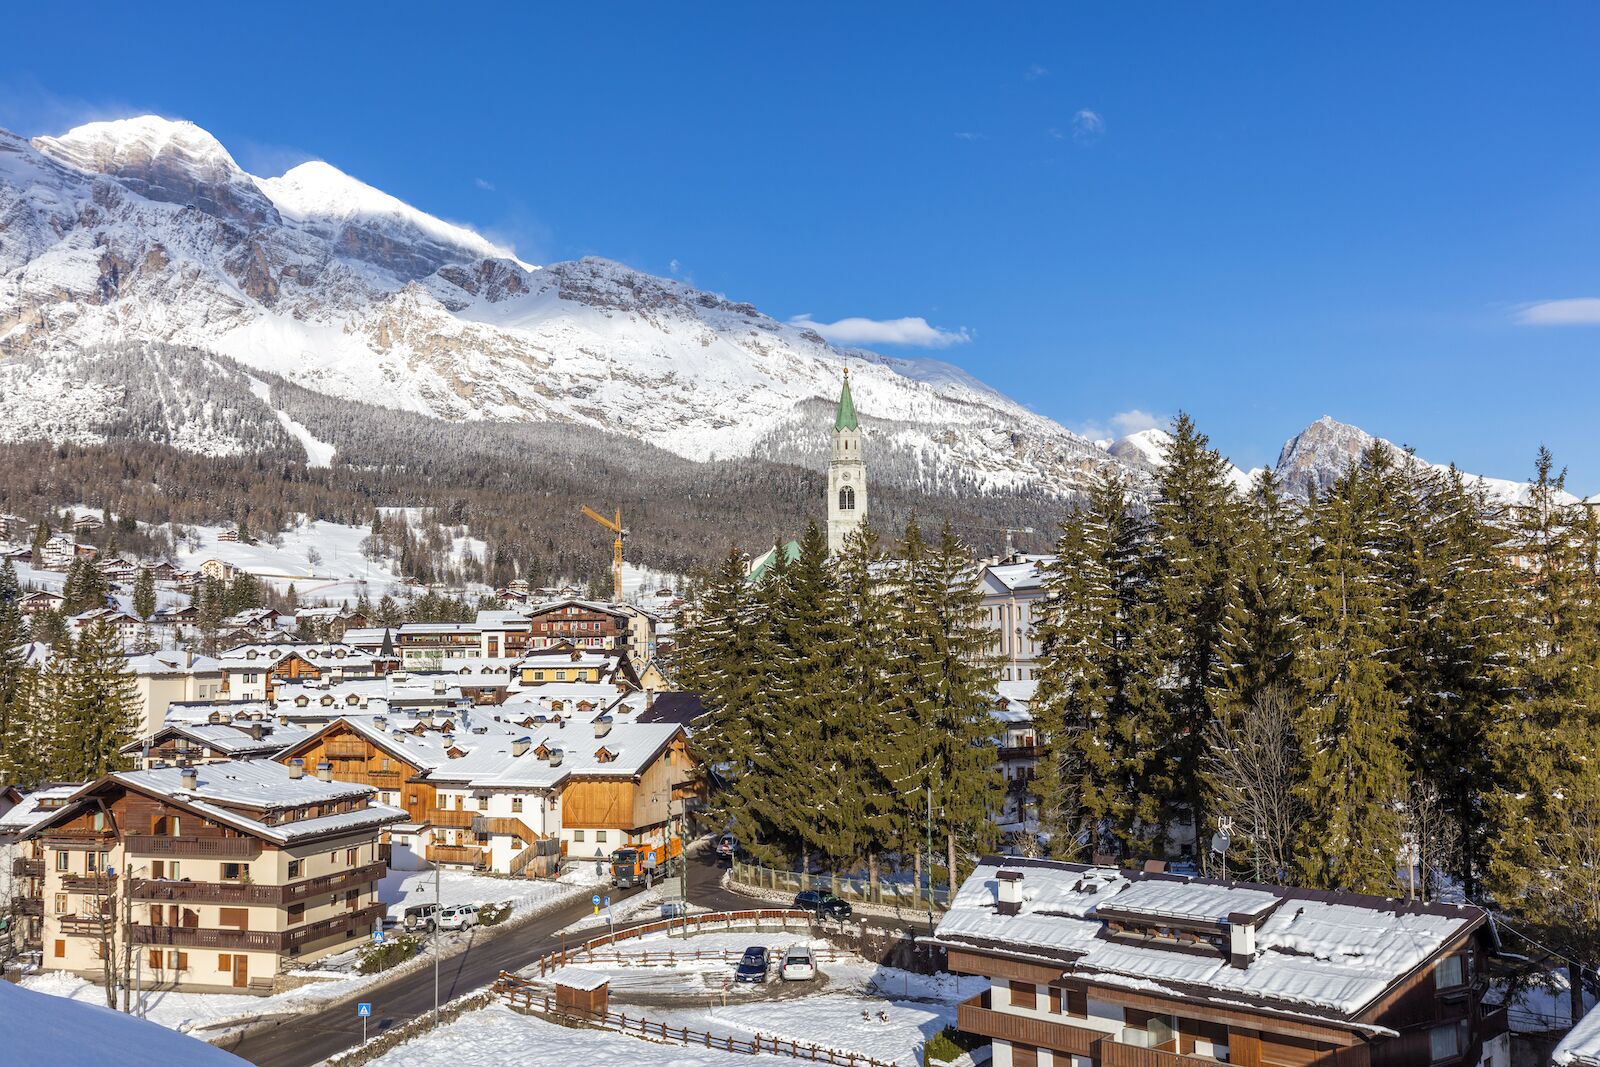 Ski town of Cortina d'Ampezzo in Italy. The sleeper train Espresso Cadore goes from Rome to Cortina d'Ampezzo.